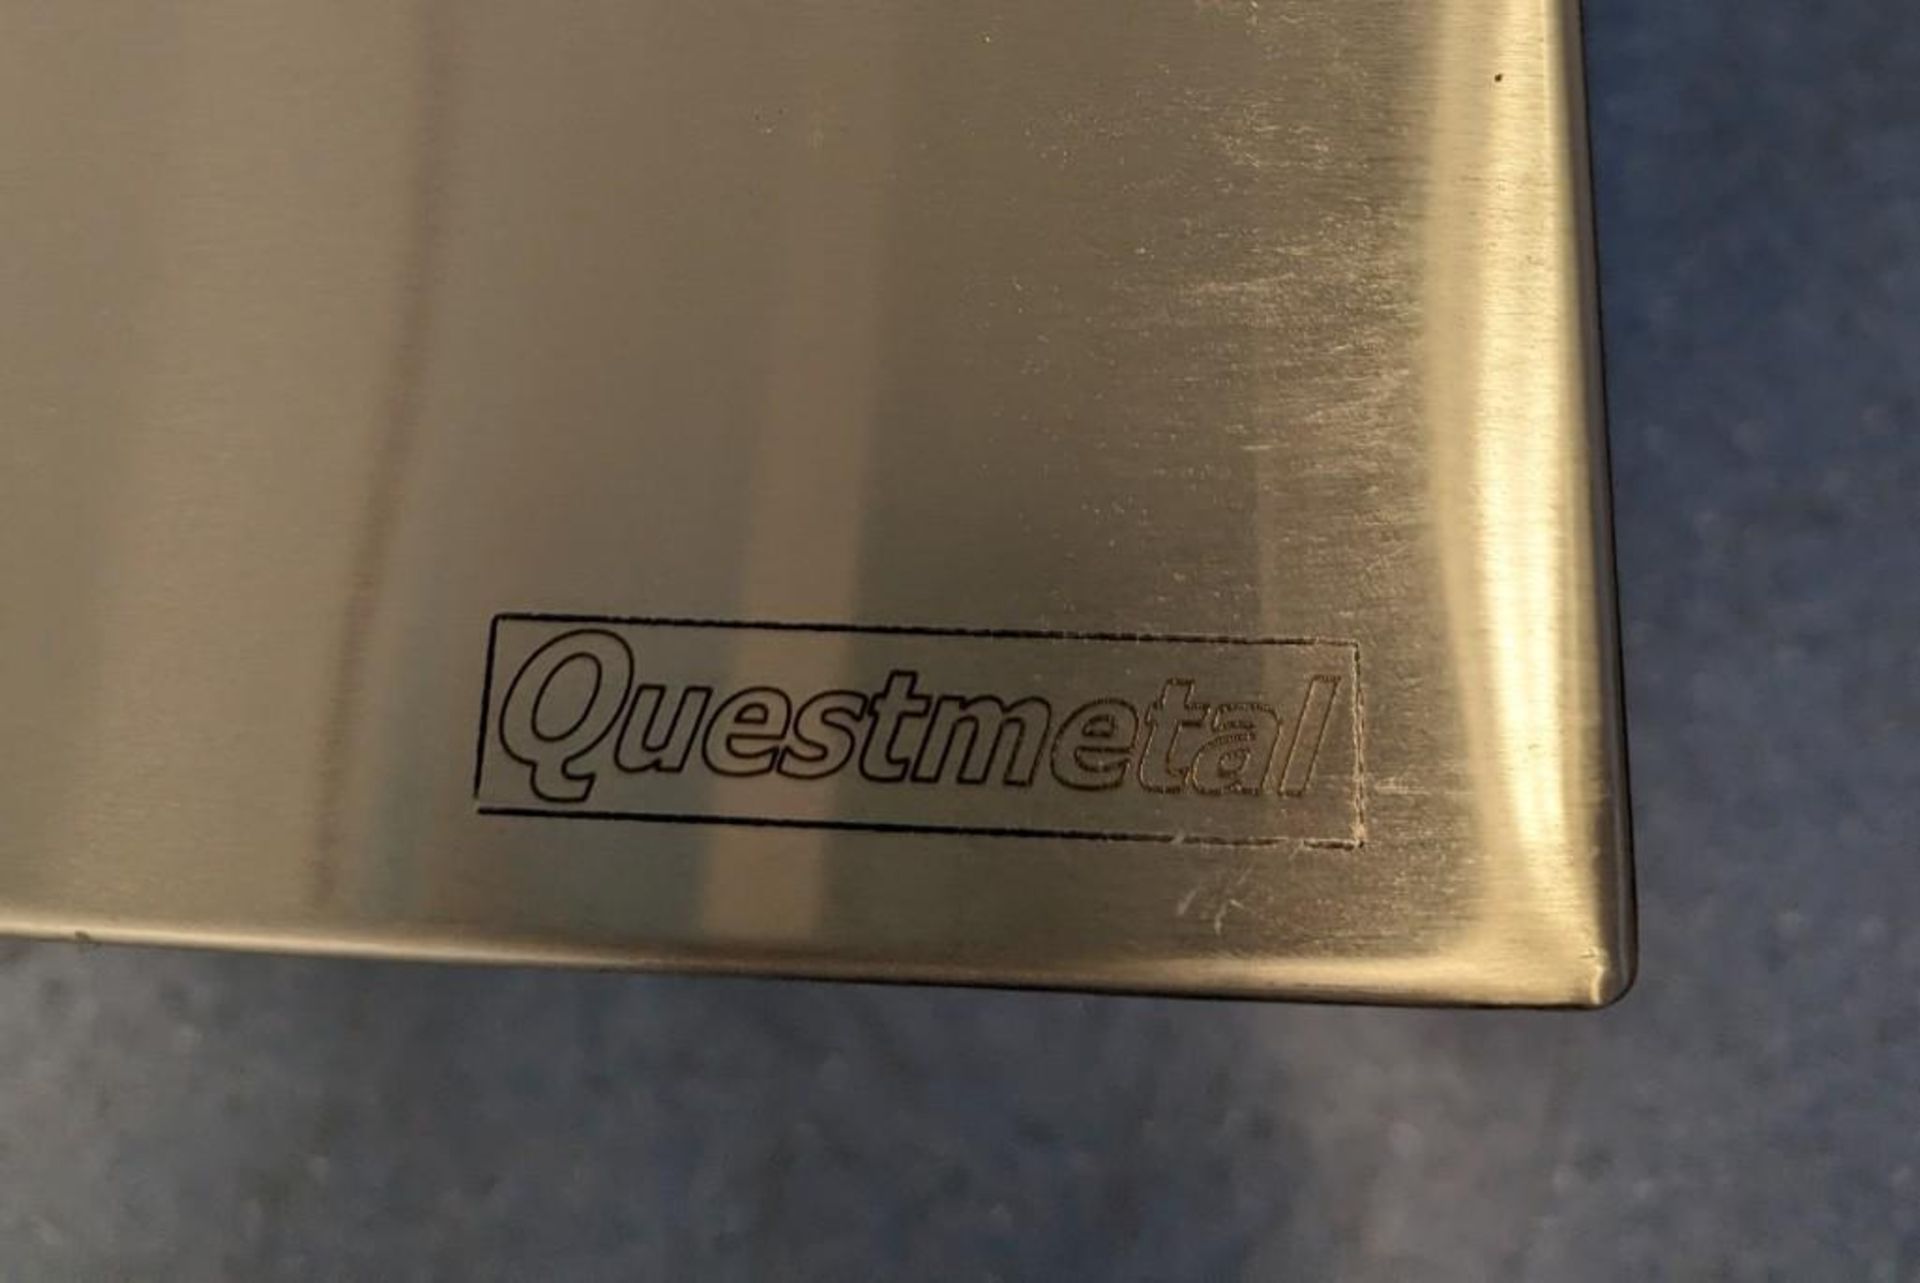 QUEST METAL CONDENSATE HOOD FOR DISHWASHER - Image 4 of 6